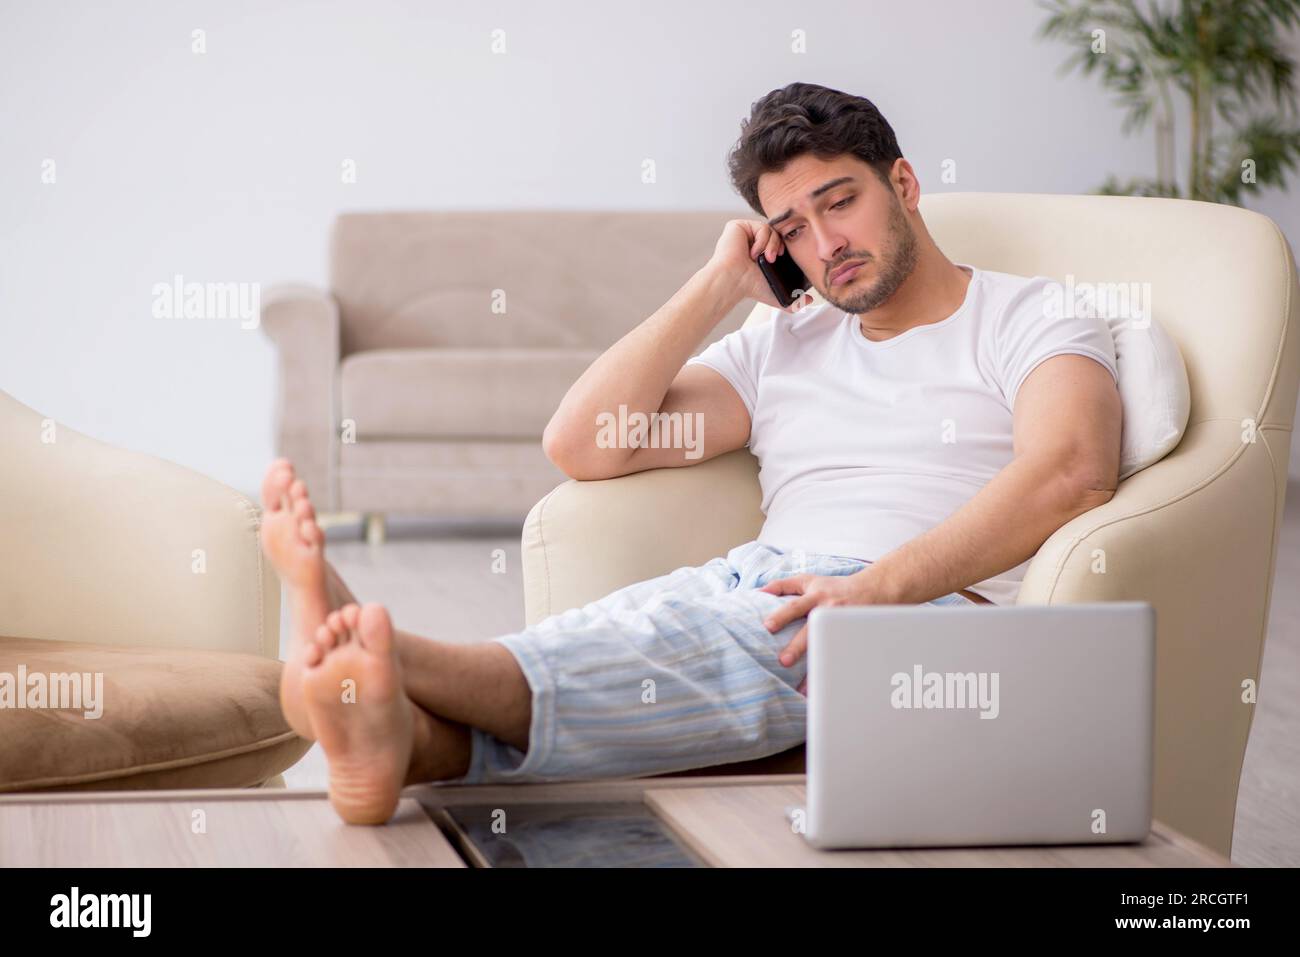 Young lazy man starting day at home Stock Photo